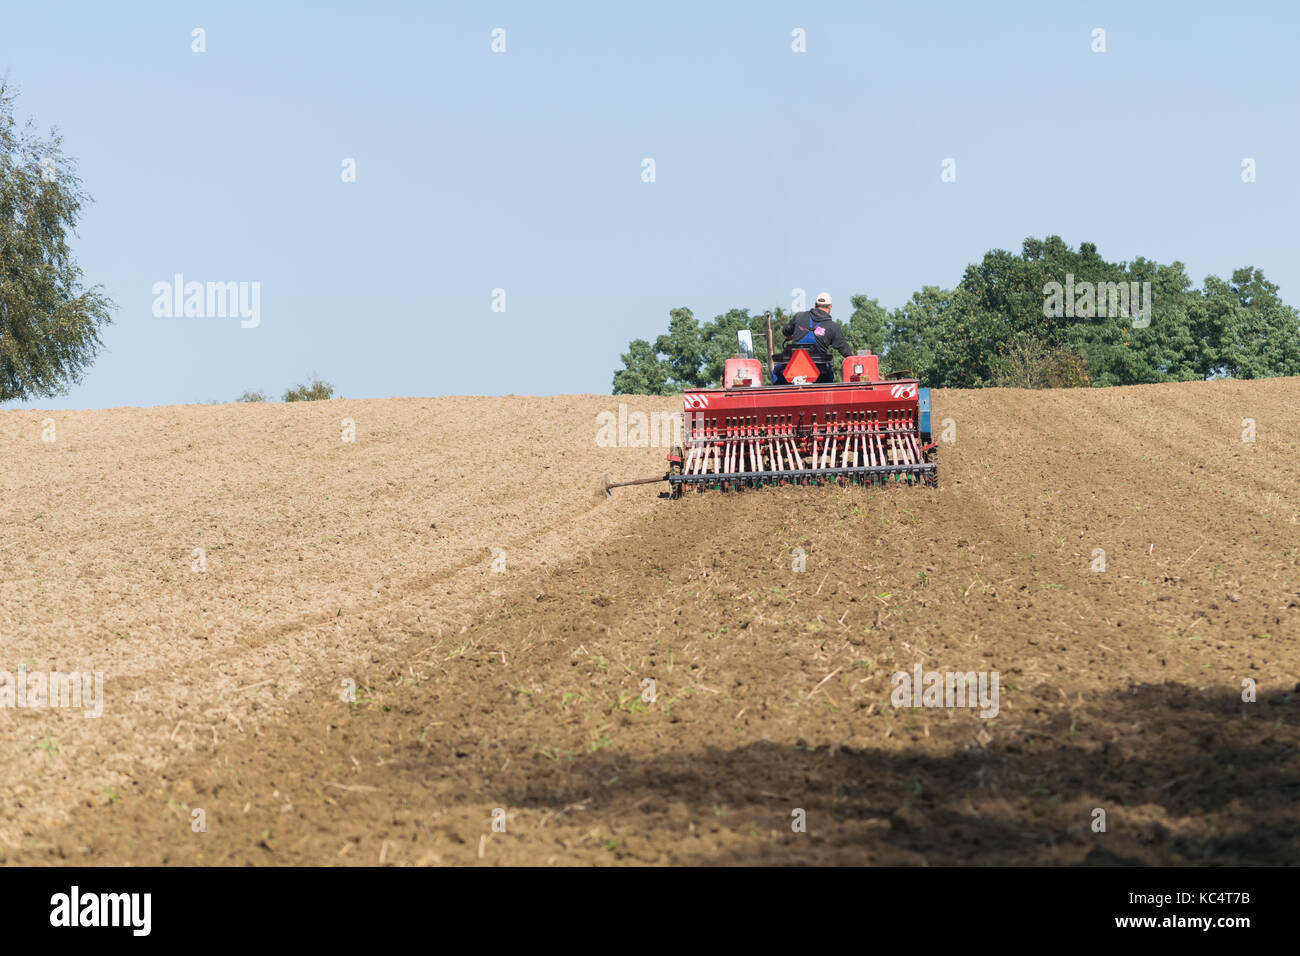 Natura 2000 Głebowic.Autumn grain sowing. October 2, 2017. Autumn sowing of wheat grain under grain harvest in 2018. Credit: w124merc / Alamy Live News Stock Photo